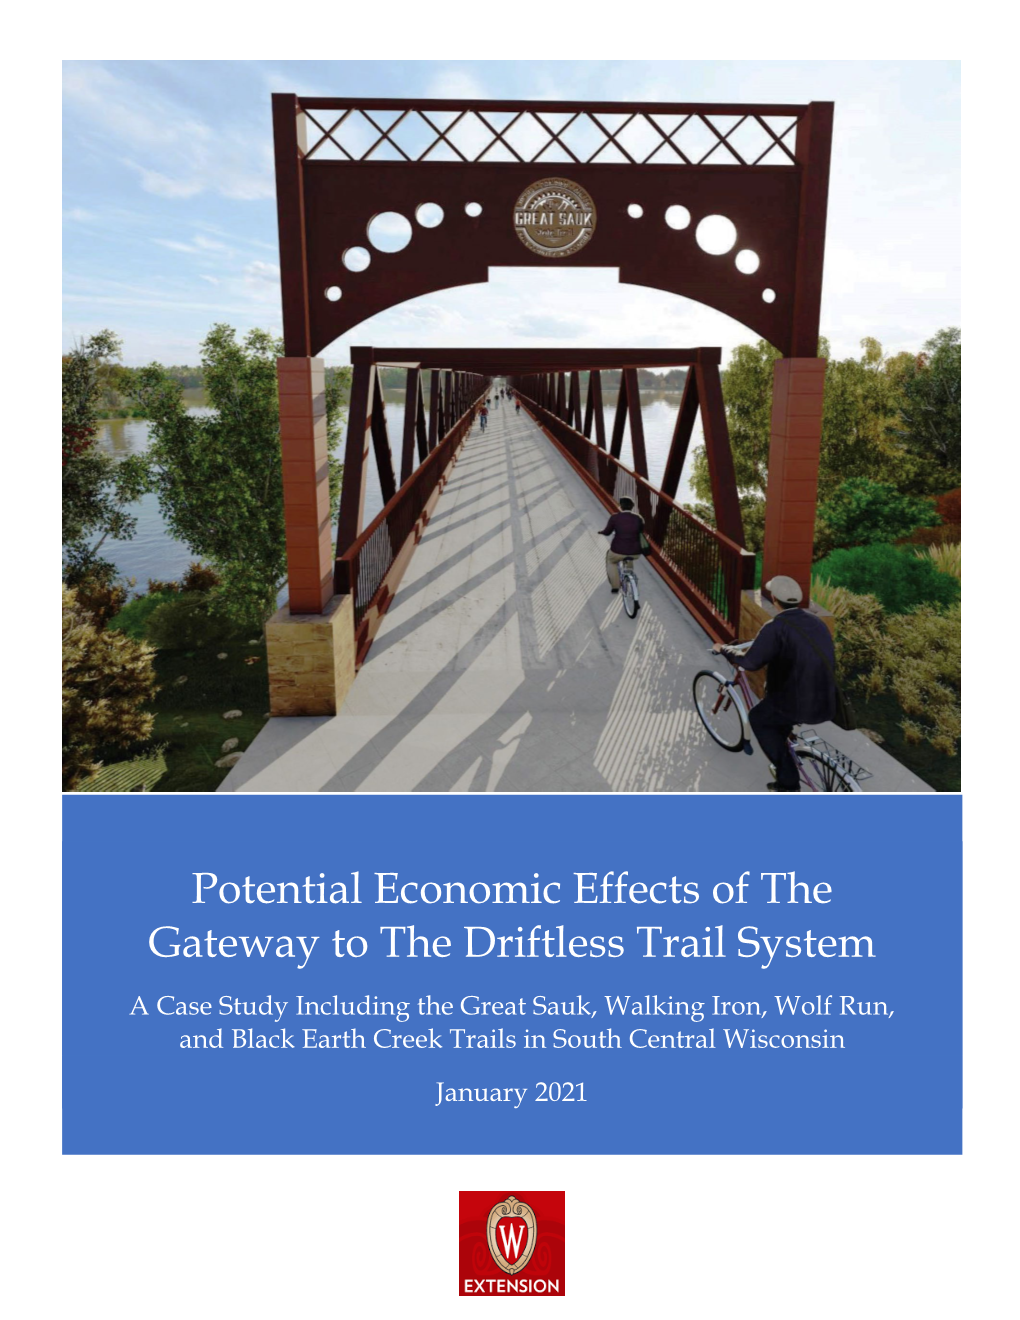 Potential Economic Effects of the Gateway to the Driftless Trail System